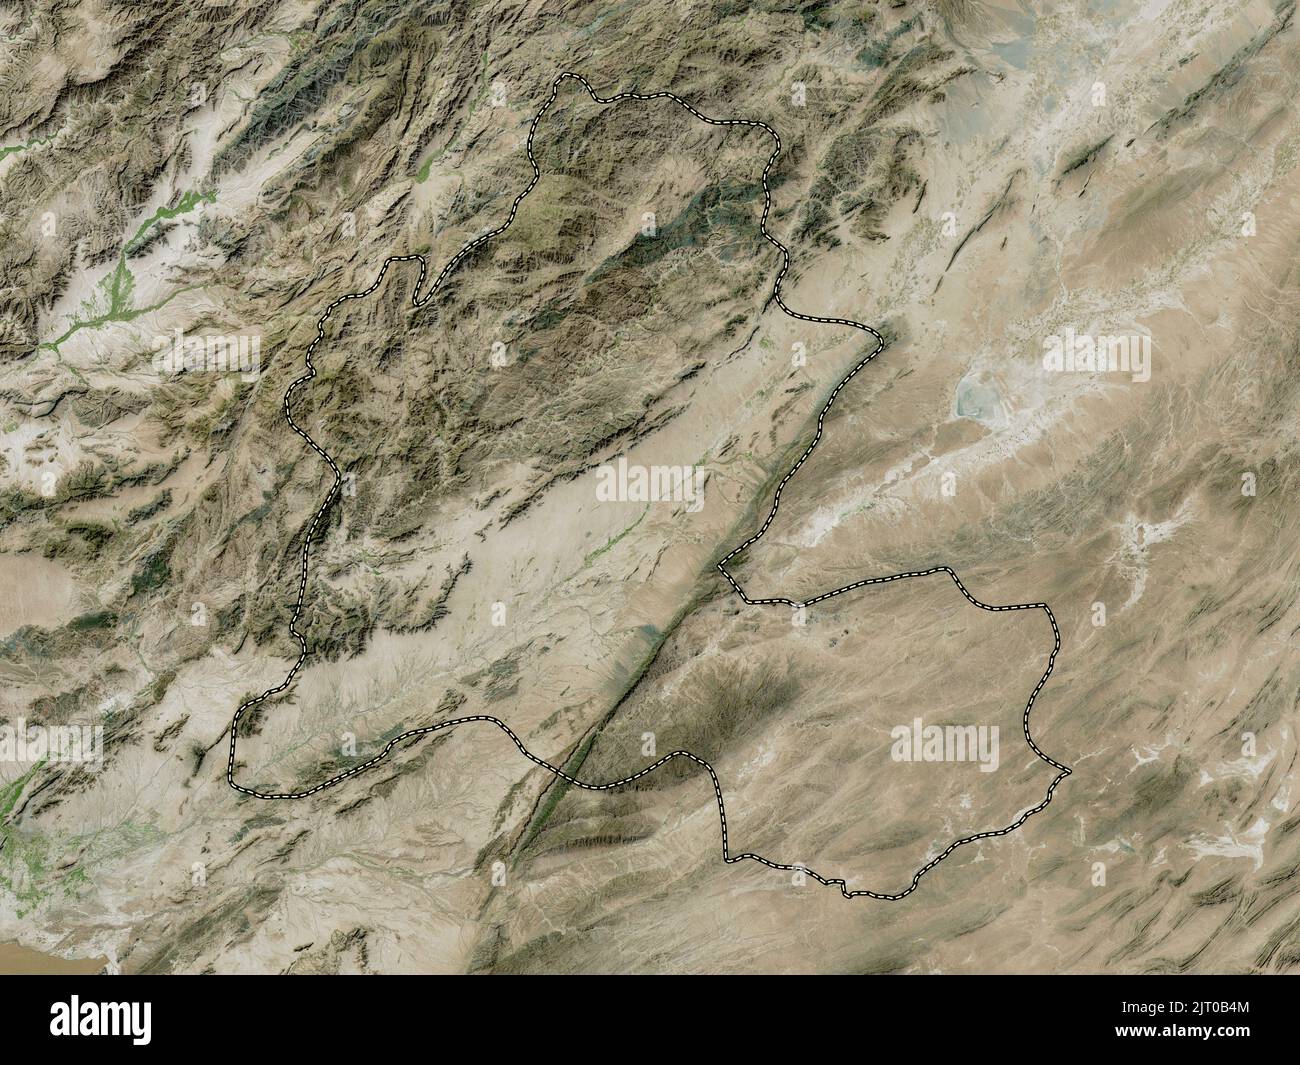 Zabul, province of Afghanistan. High resolution satellite map Stock Photo